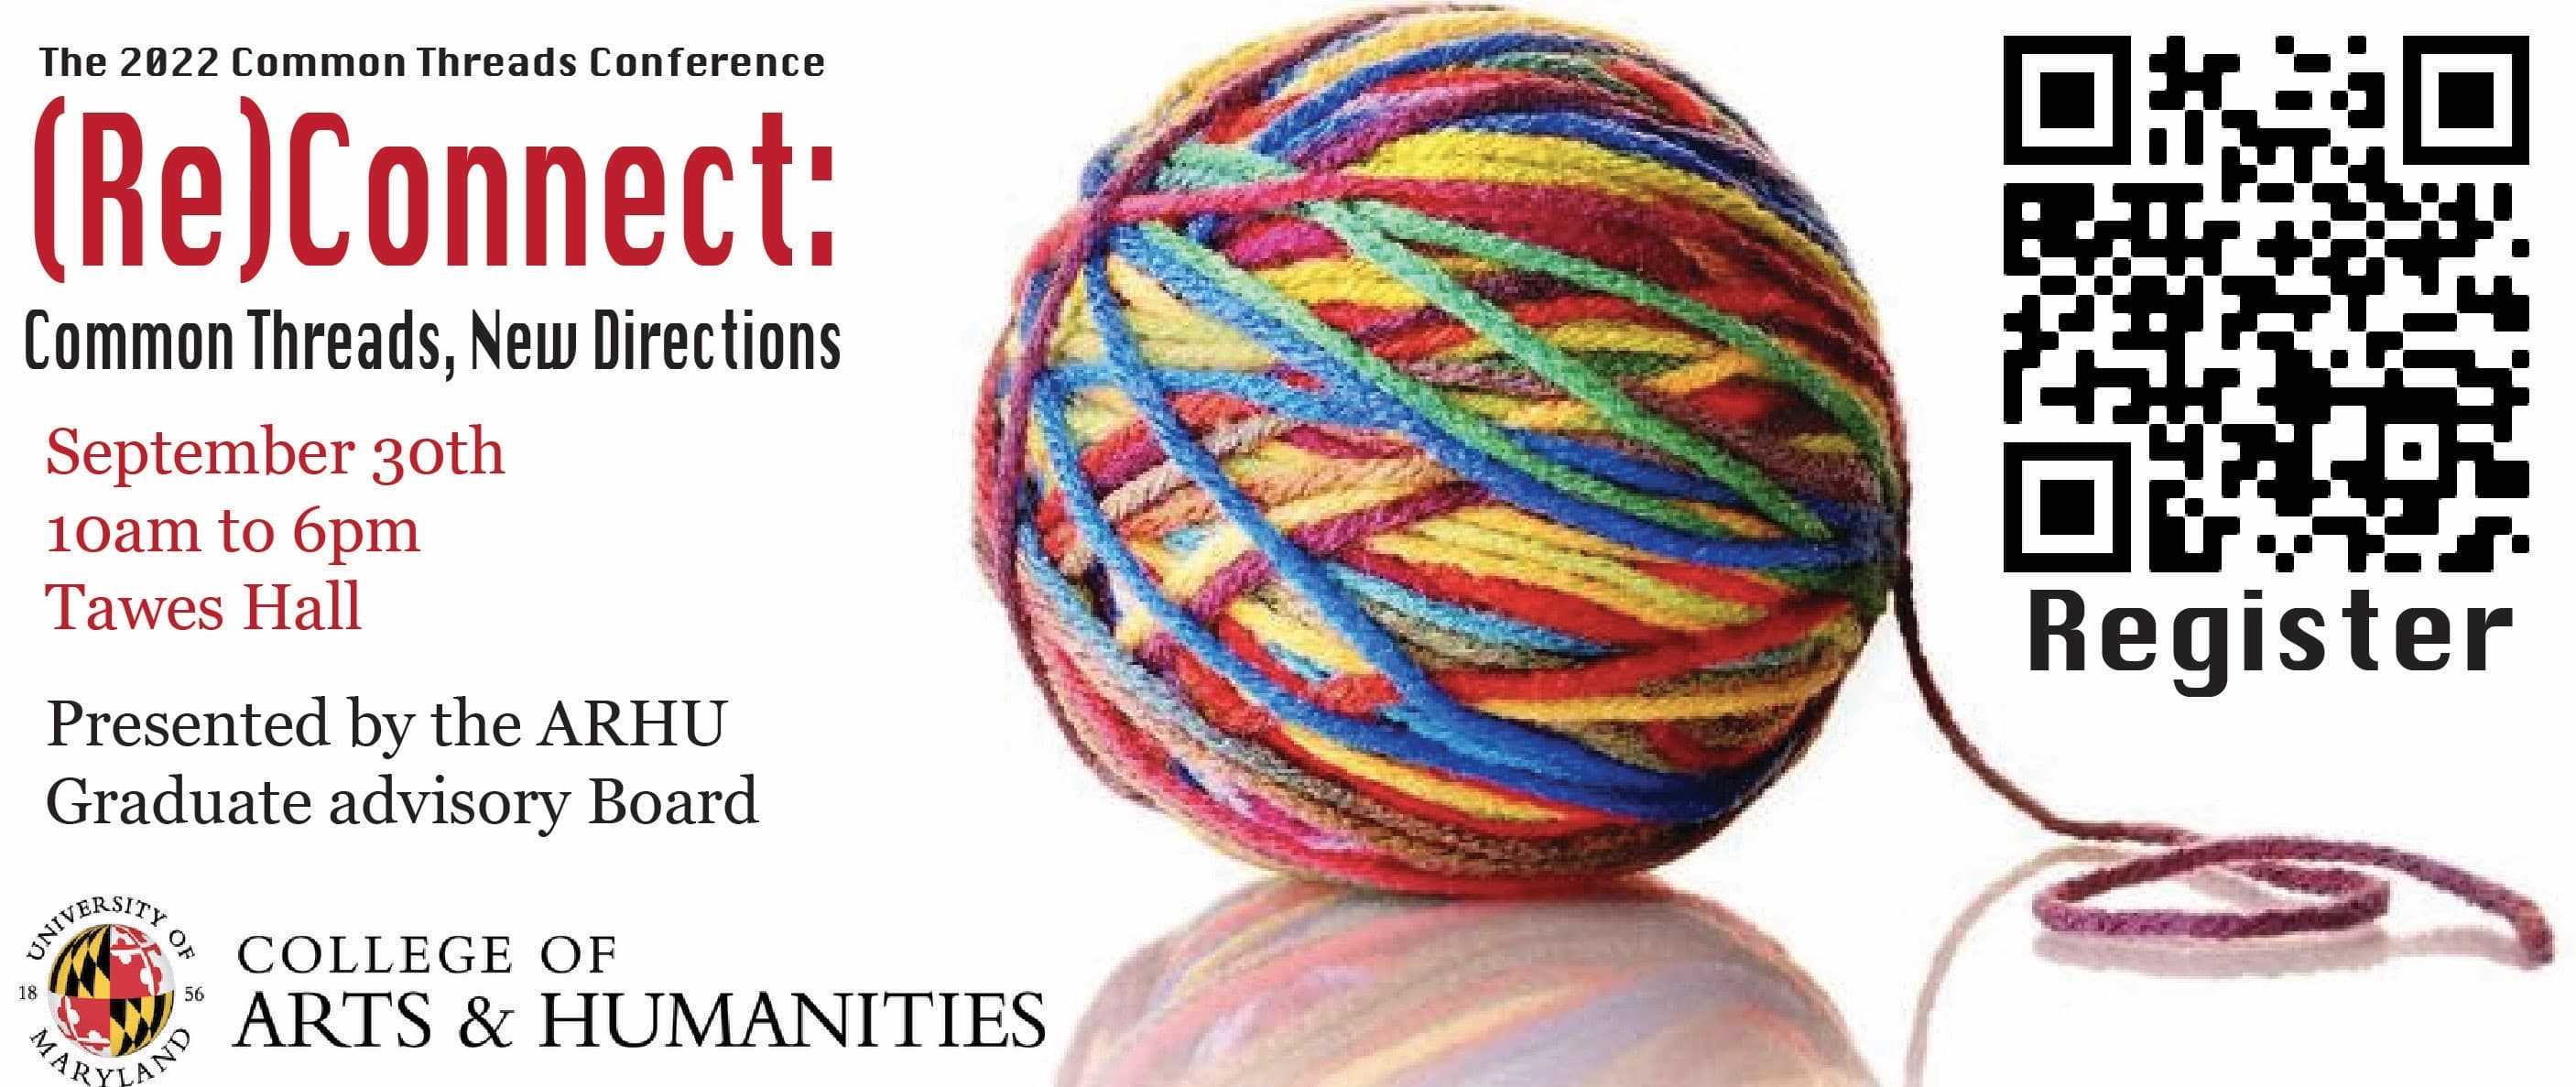 A poster for the Common Threads conference, (Re)Connect: Common Threads, New Directions. Friday, September 30th, 10am-6pm at Tawes Hall. Presented by the ARHU Graduate Advisory Board. Text and QR code next to an image of a multicolored yarn ball.